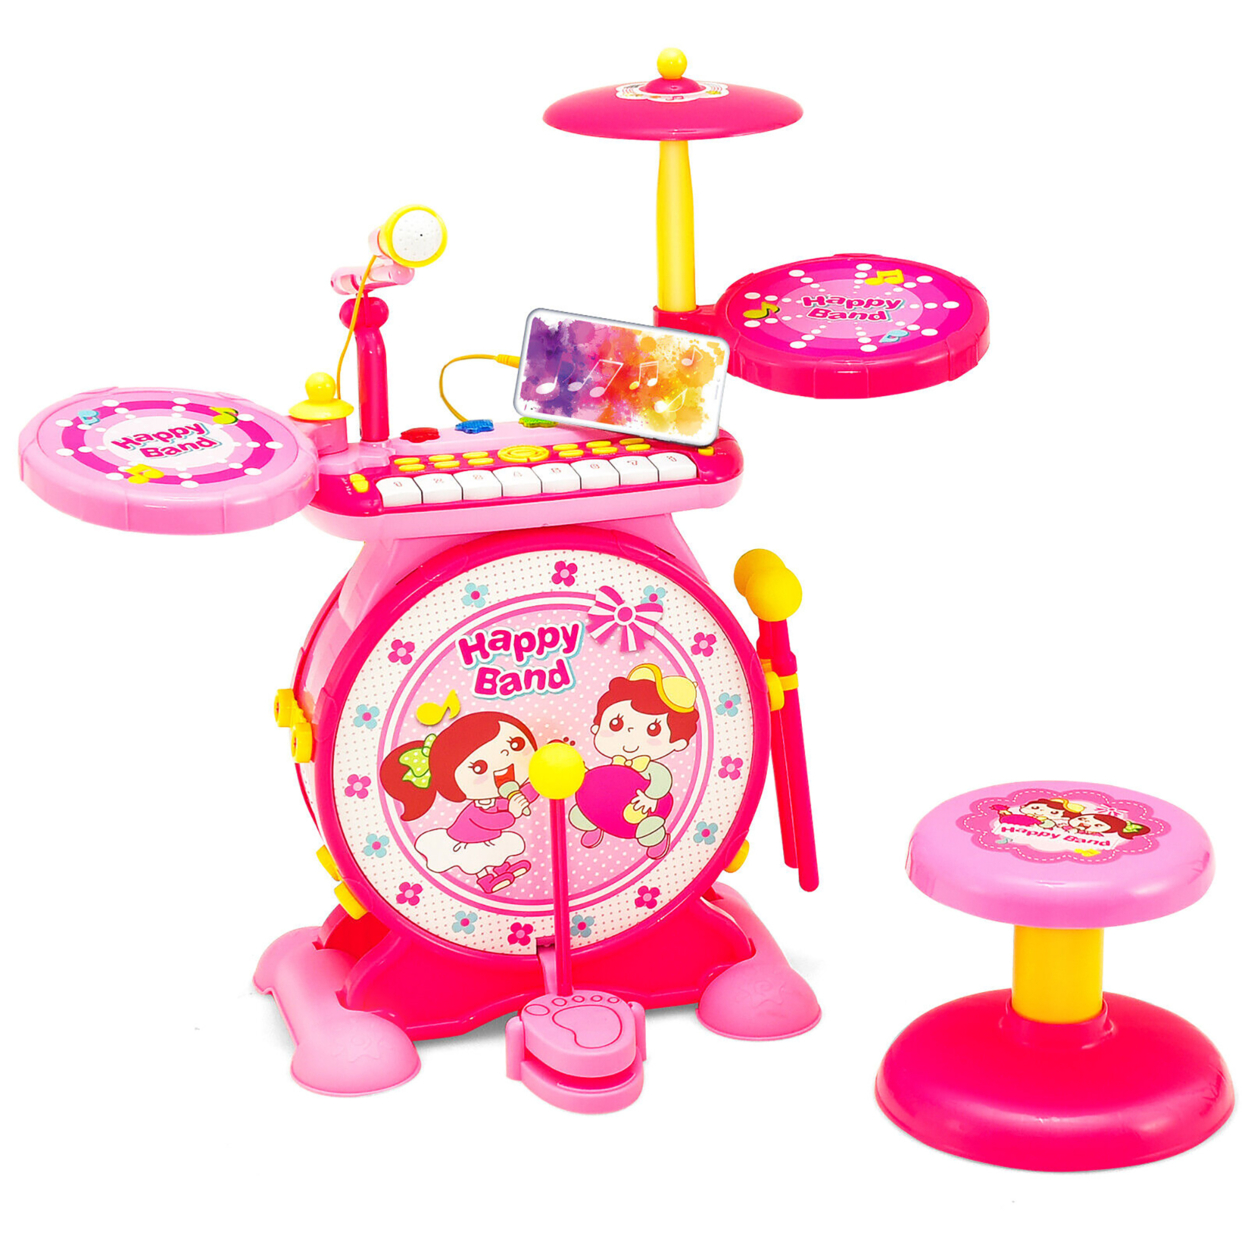 2-in-1 Kids Electronic Drum Kit Music Instrument Toy W/ Keyboard Microphone - Pink